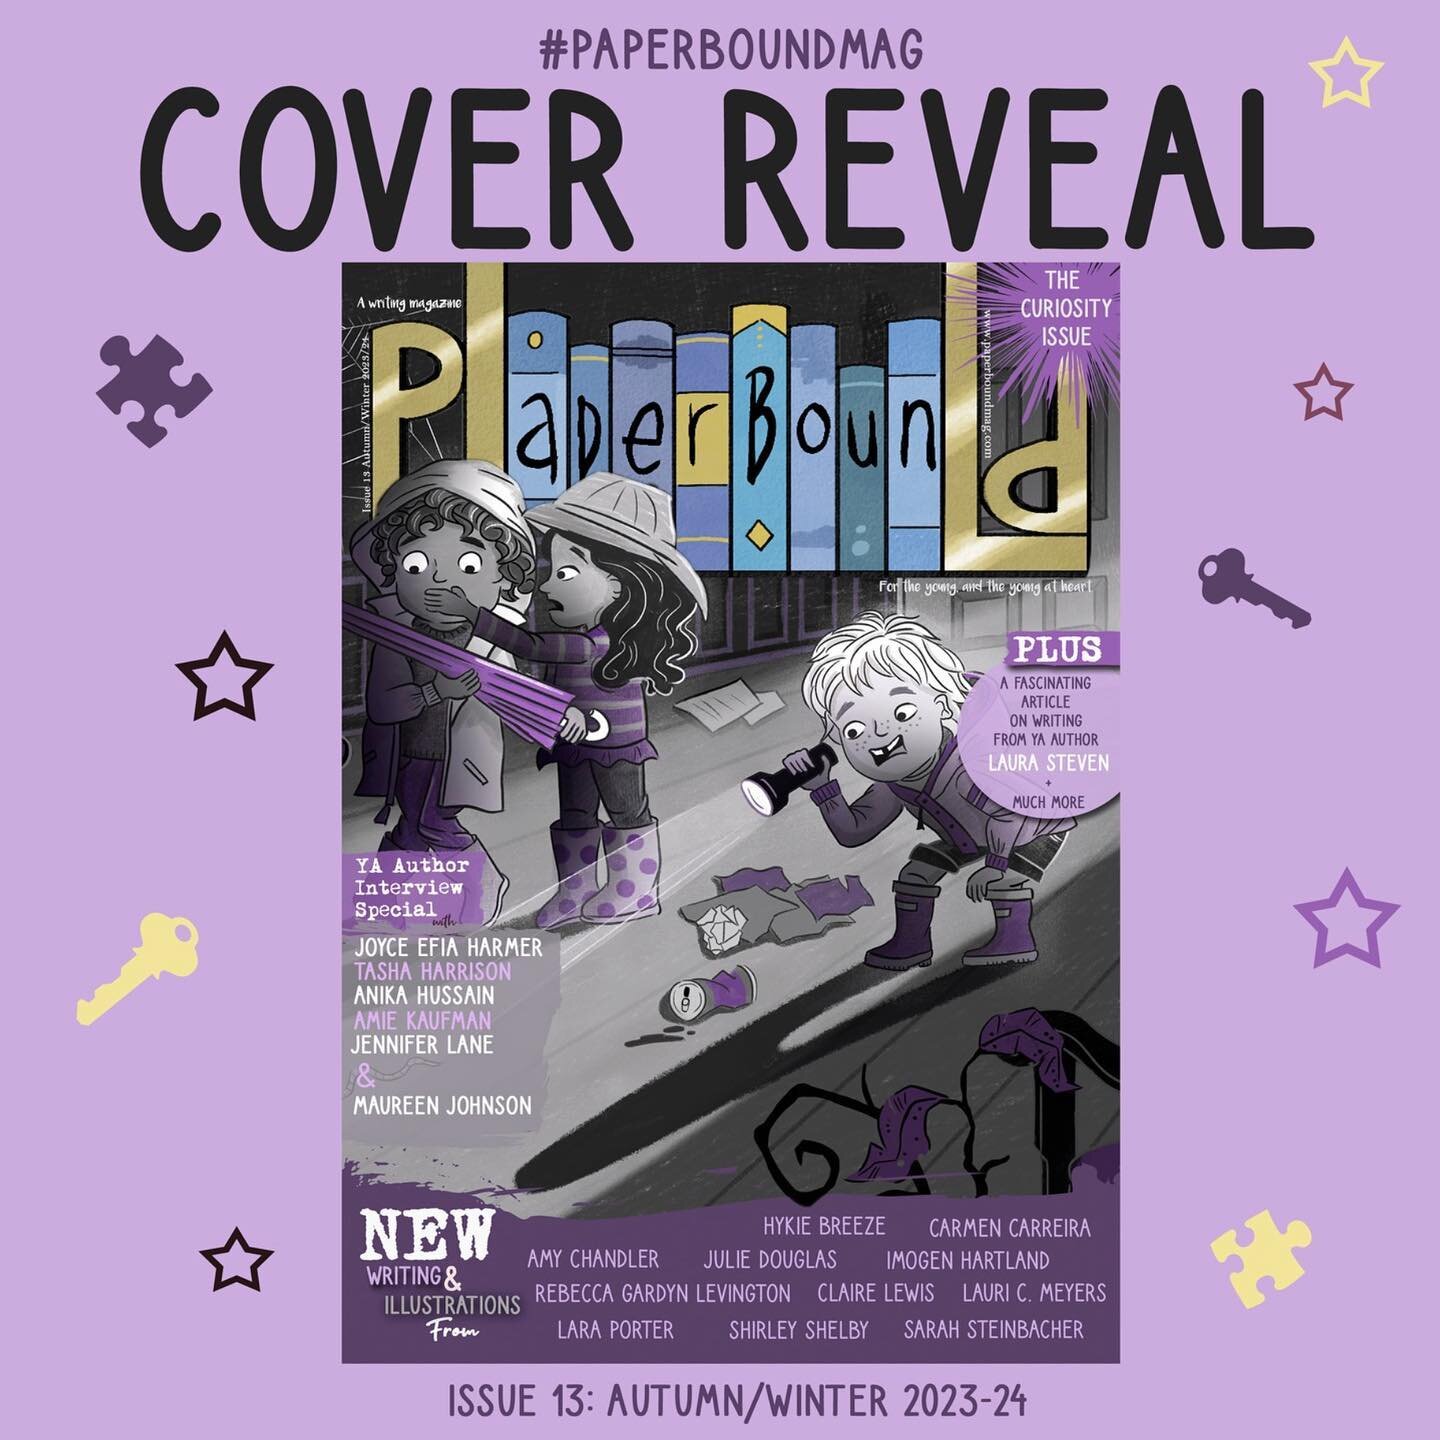 So thrilled to share the cover reveal of @paperboundmagazine &lsquo;s upcoming issue with cover art by me! ✨🔦💜

The biggest THANK YOU to the PaperBound team, I am beyond chuffed to be included along with so many talented writers and illustrators. 
